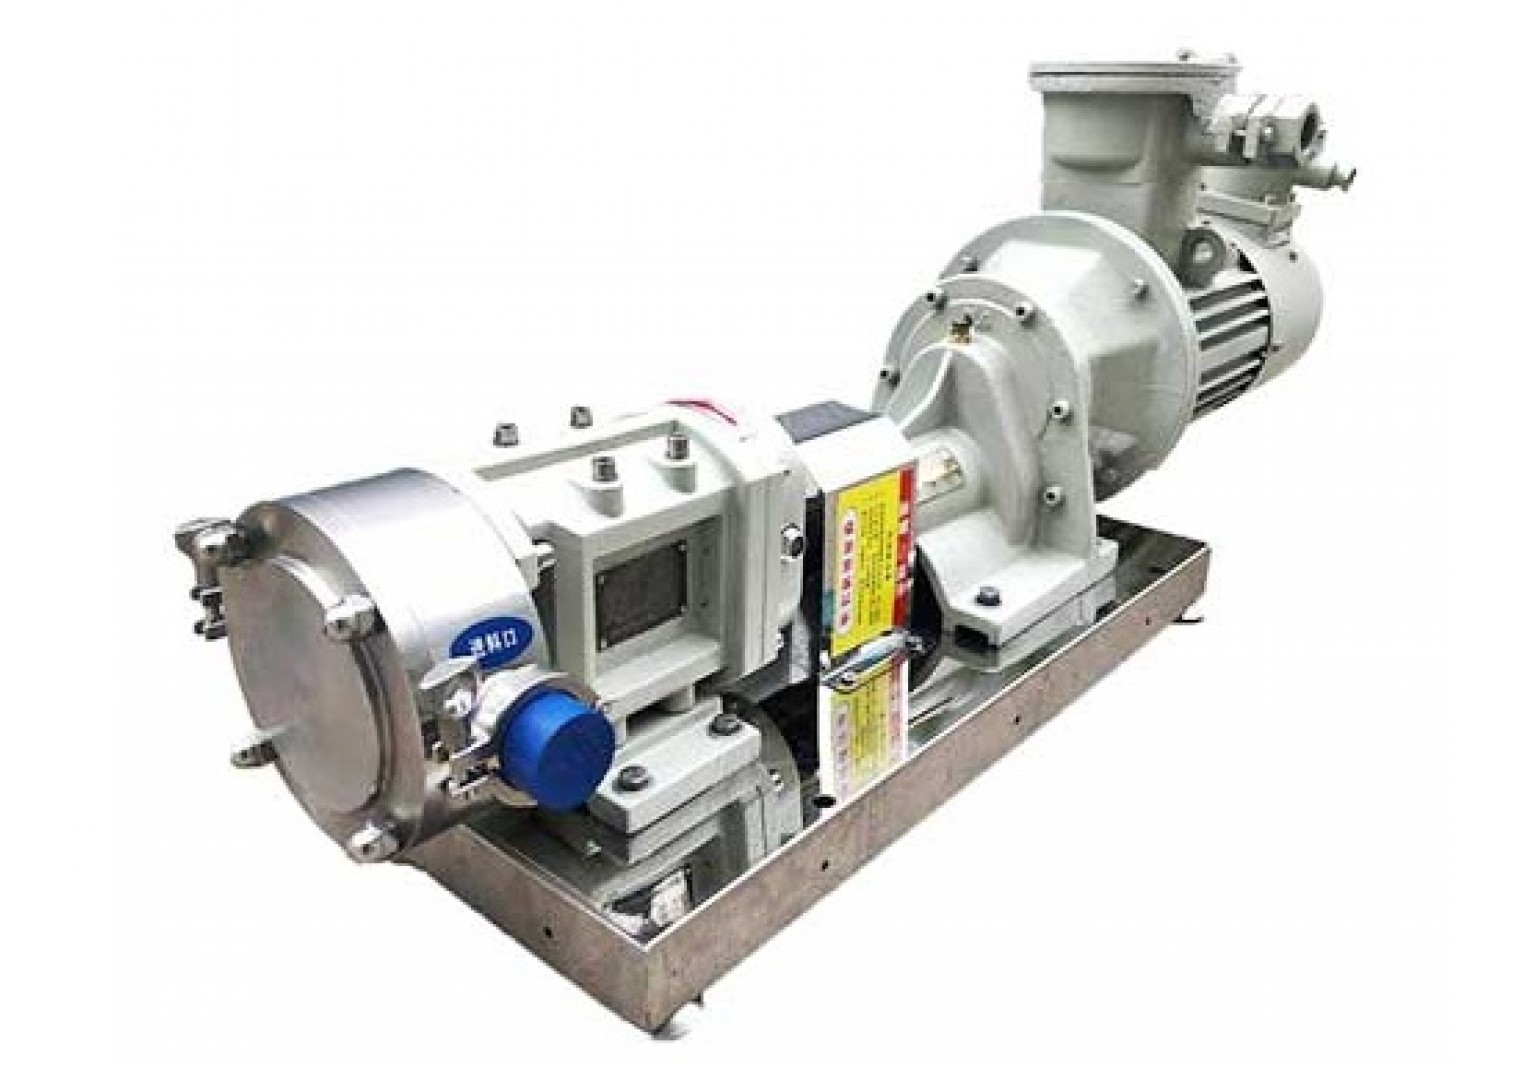 Daily Chemicals Transfer Pump 3RP-40